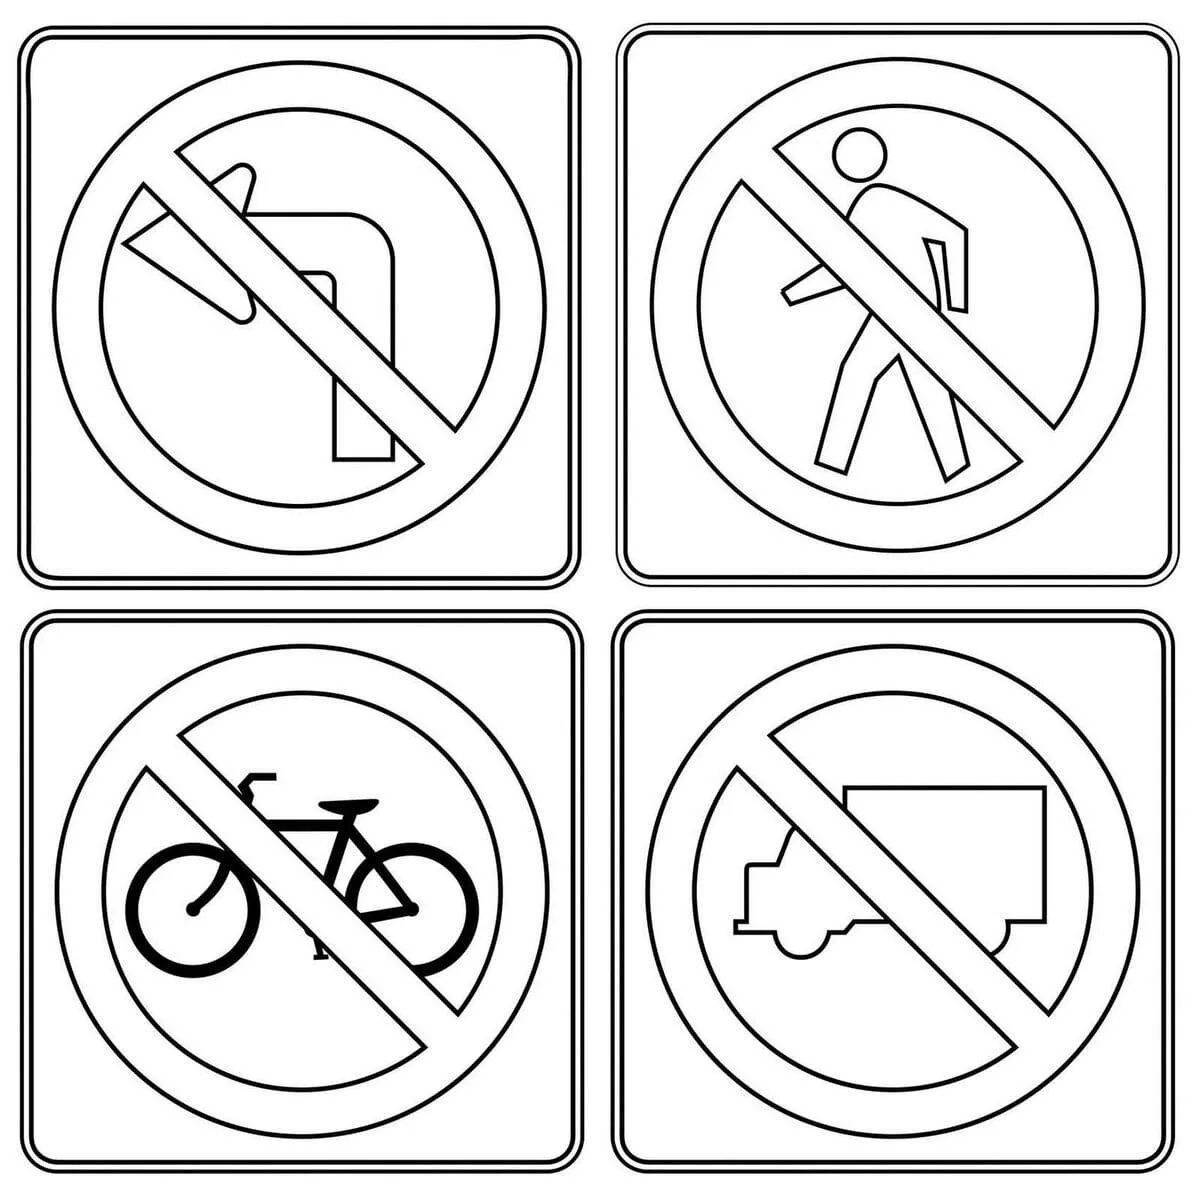 A playful road sign coloring page for schoolchildren